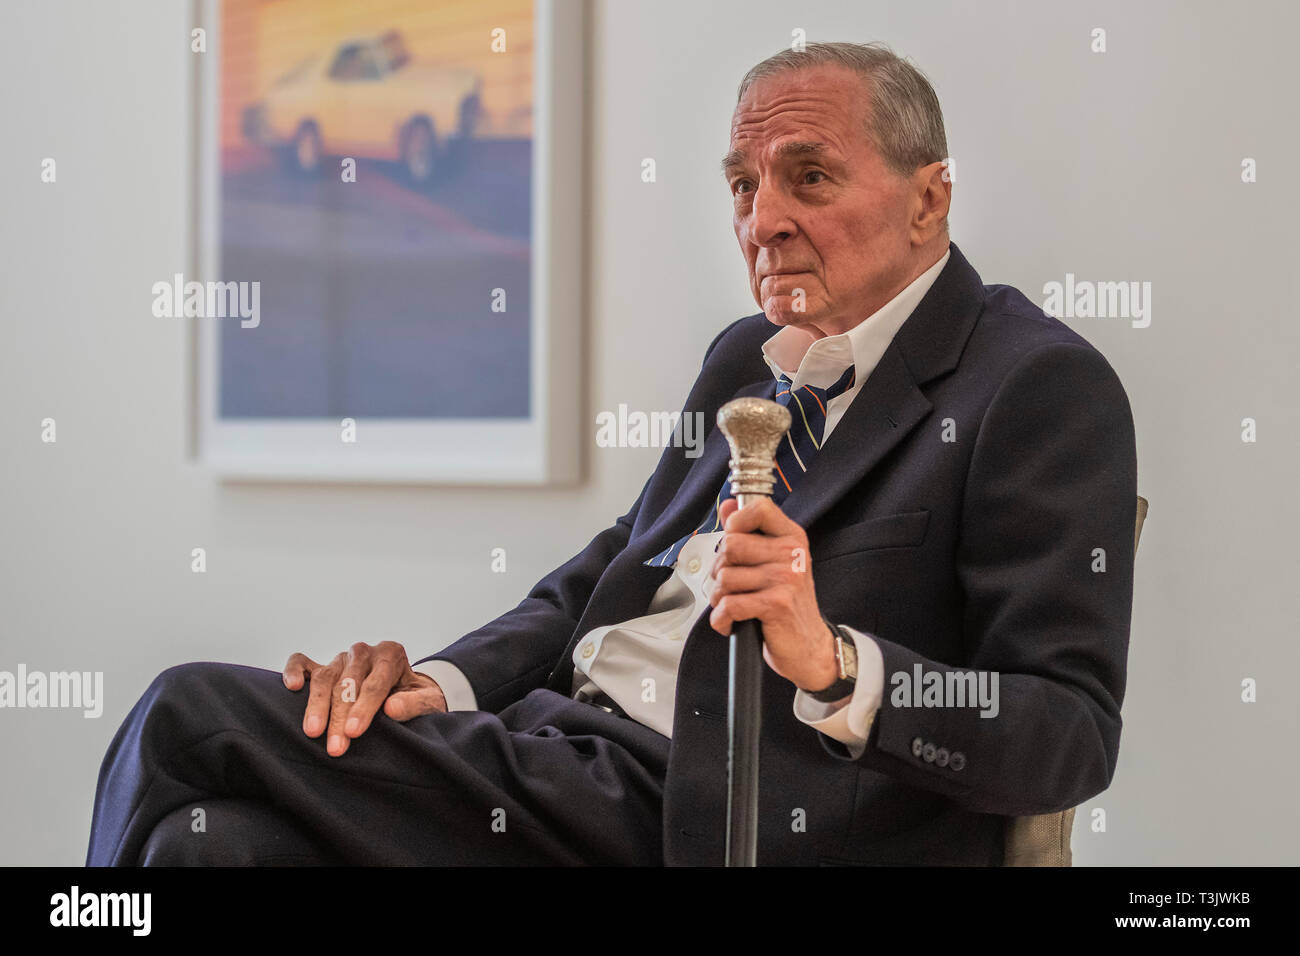 London, UK. 10th Apr, 2019. William Eggleston's (pictured) new exhibition 2¼ opens at the David Zwirner gallery. The exhibition is made up of a selection of works from his 2¼ series, which have never been exhibited before. William chose the selection himself. This will be his first show with the London gallery. Credit: Guy Bell/Alamy Live News Stock Photo